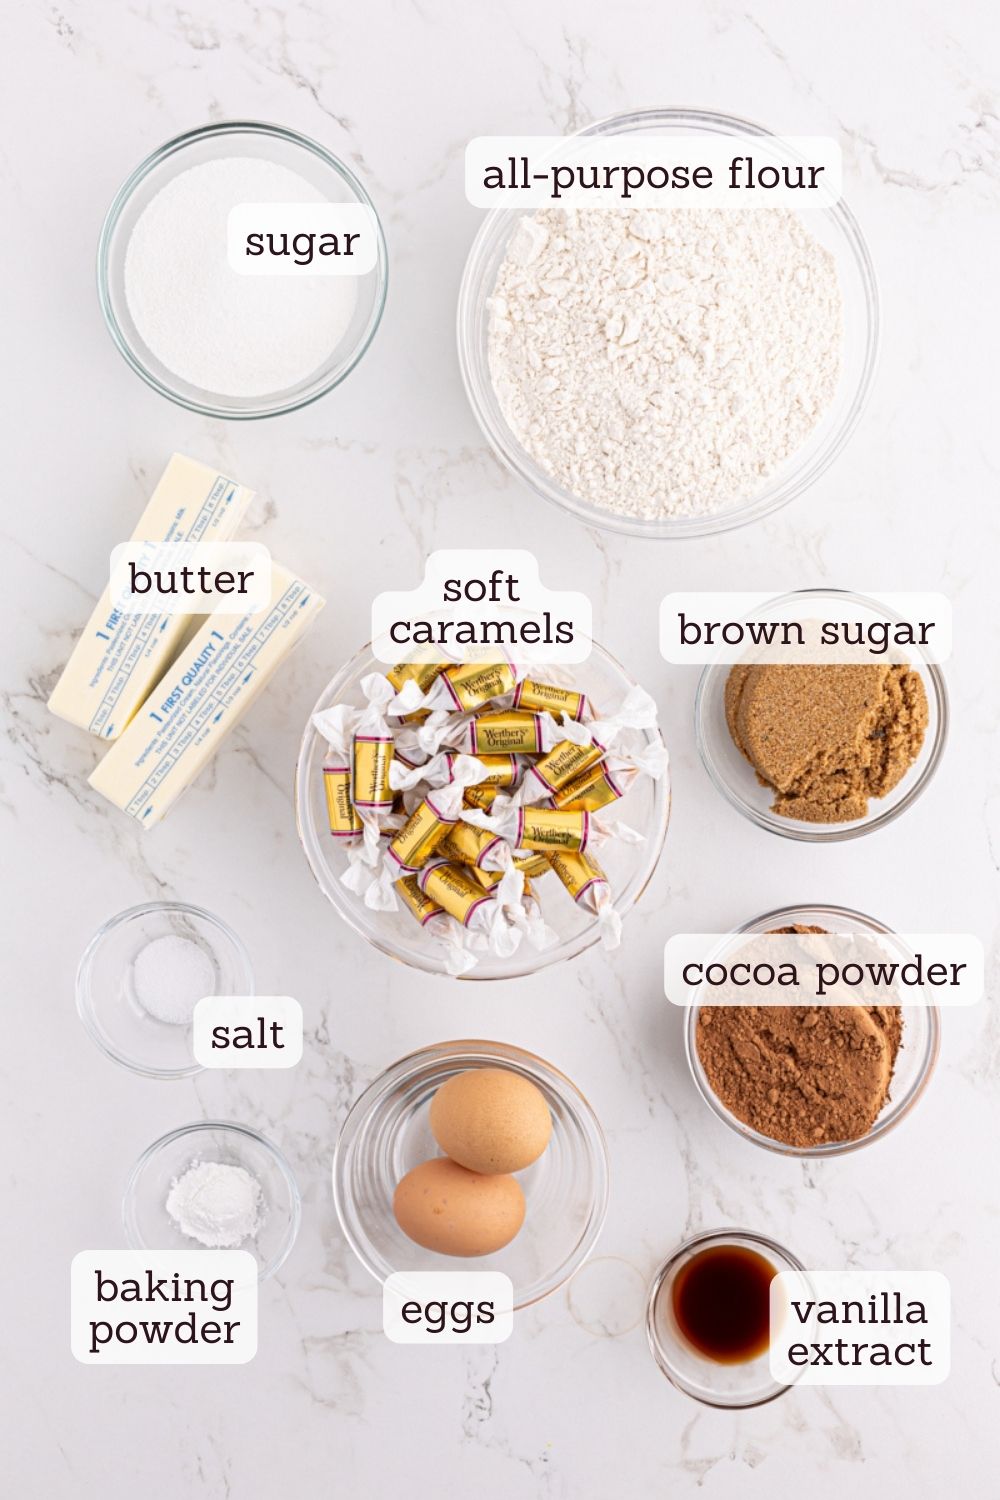 Overhead view of ingredients for chocolate caramel cookies